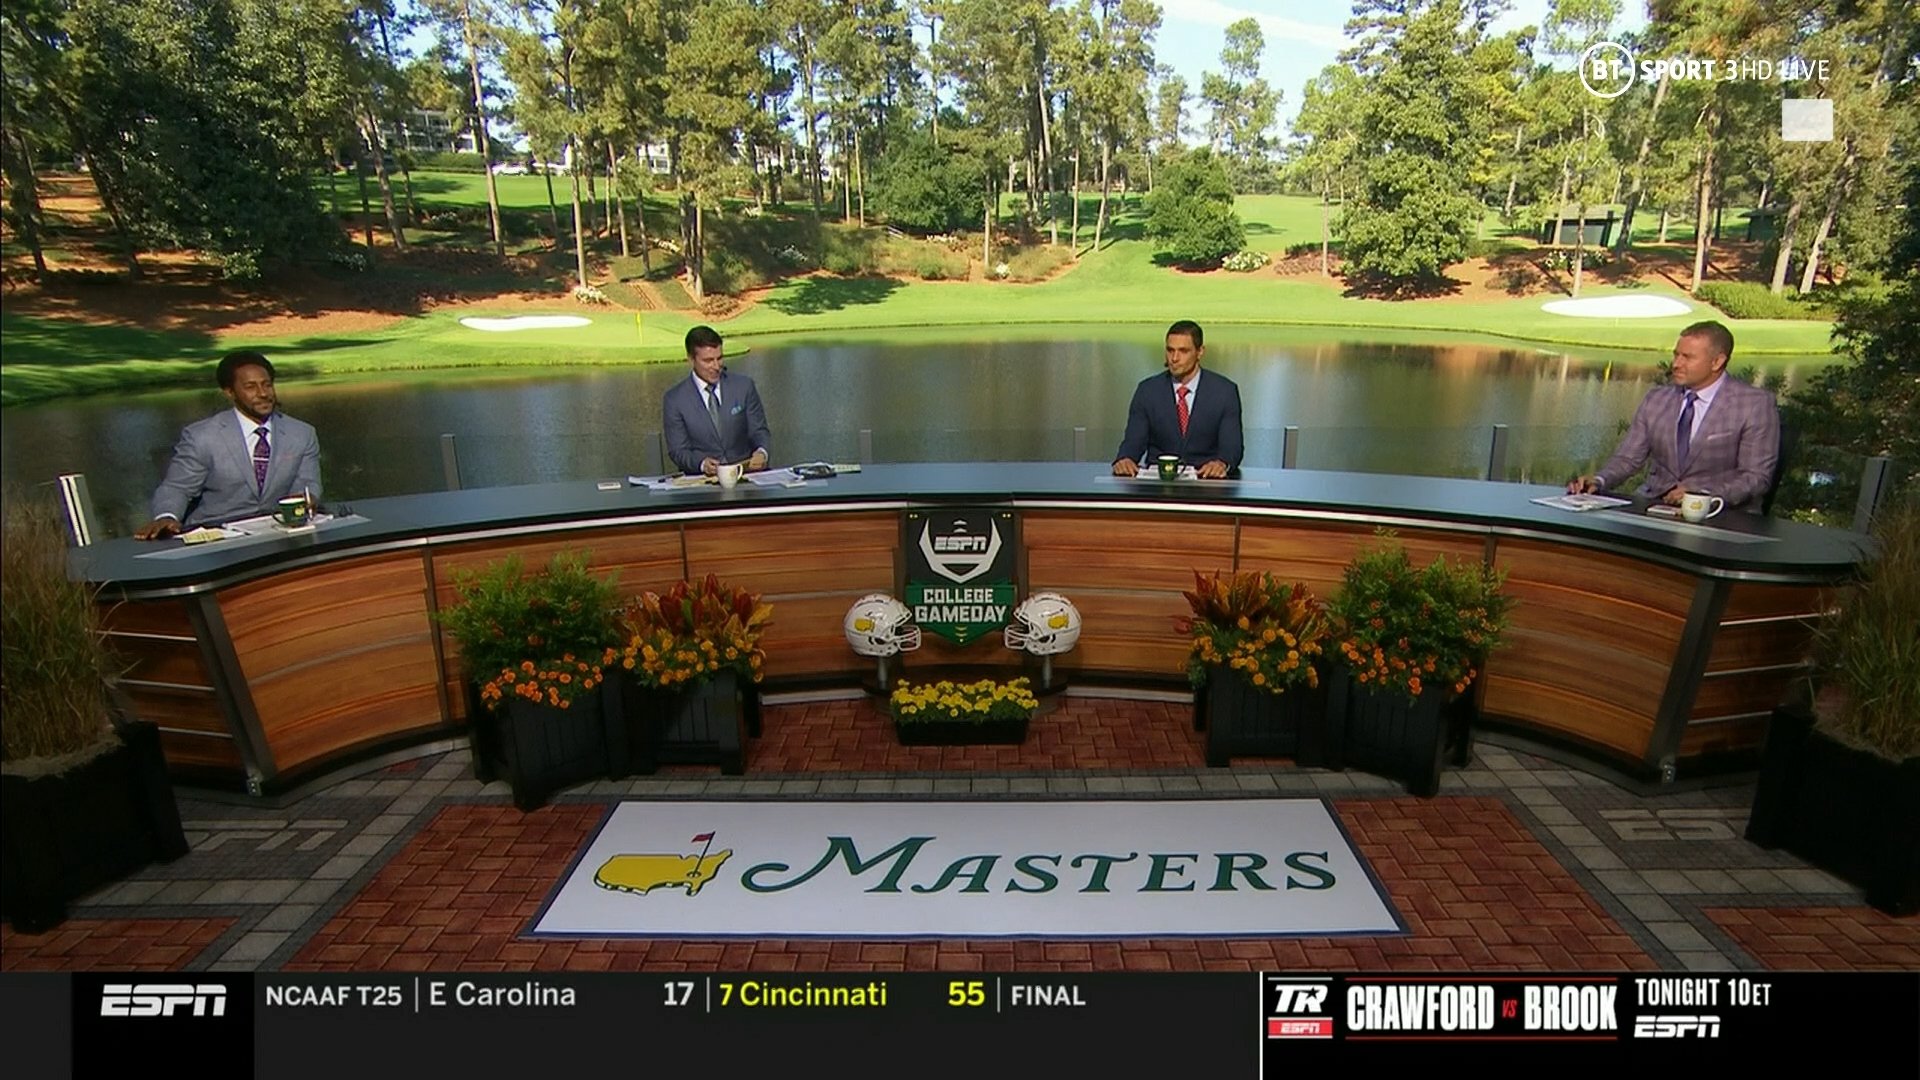 ESPN GameDay at The Masters